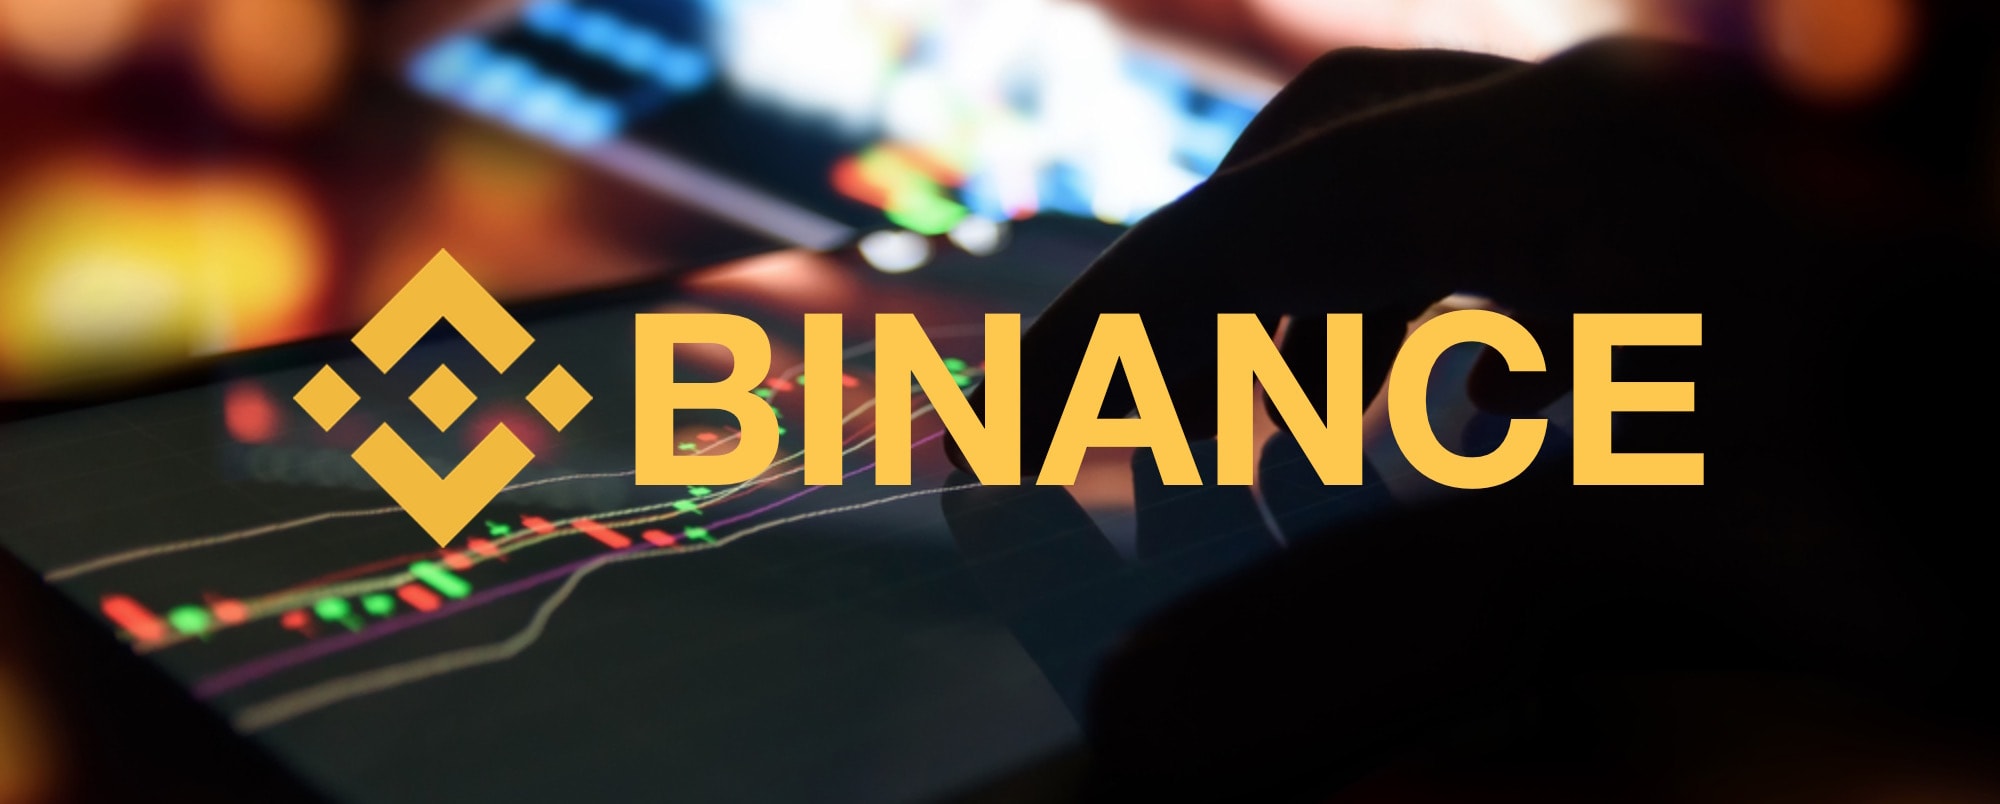 project not listed on binance